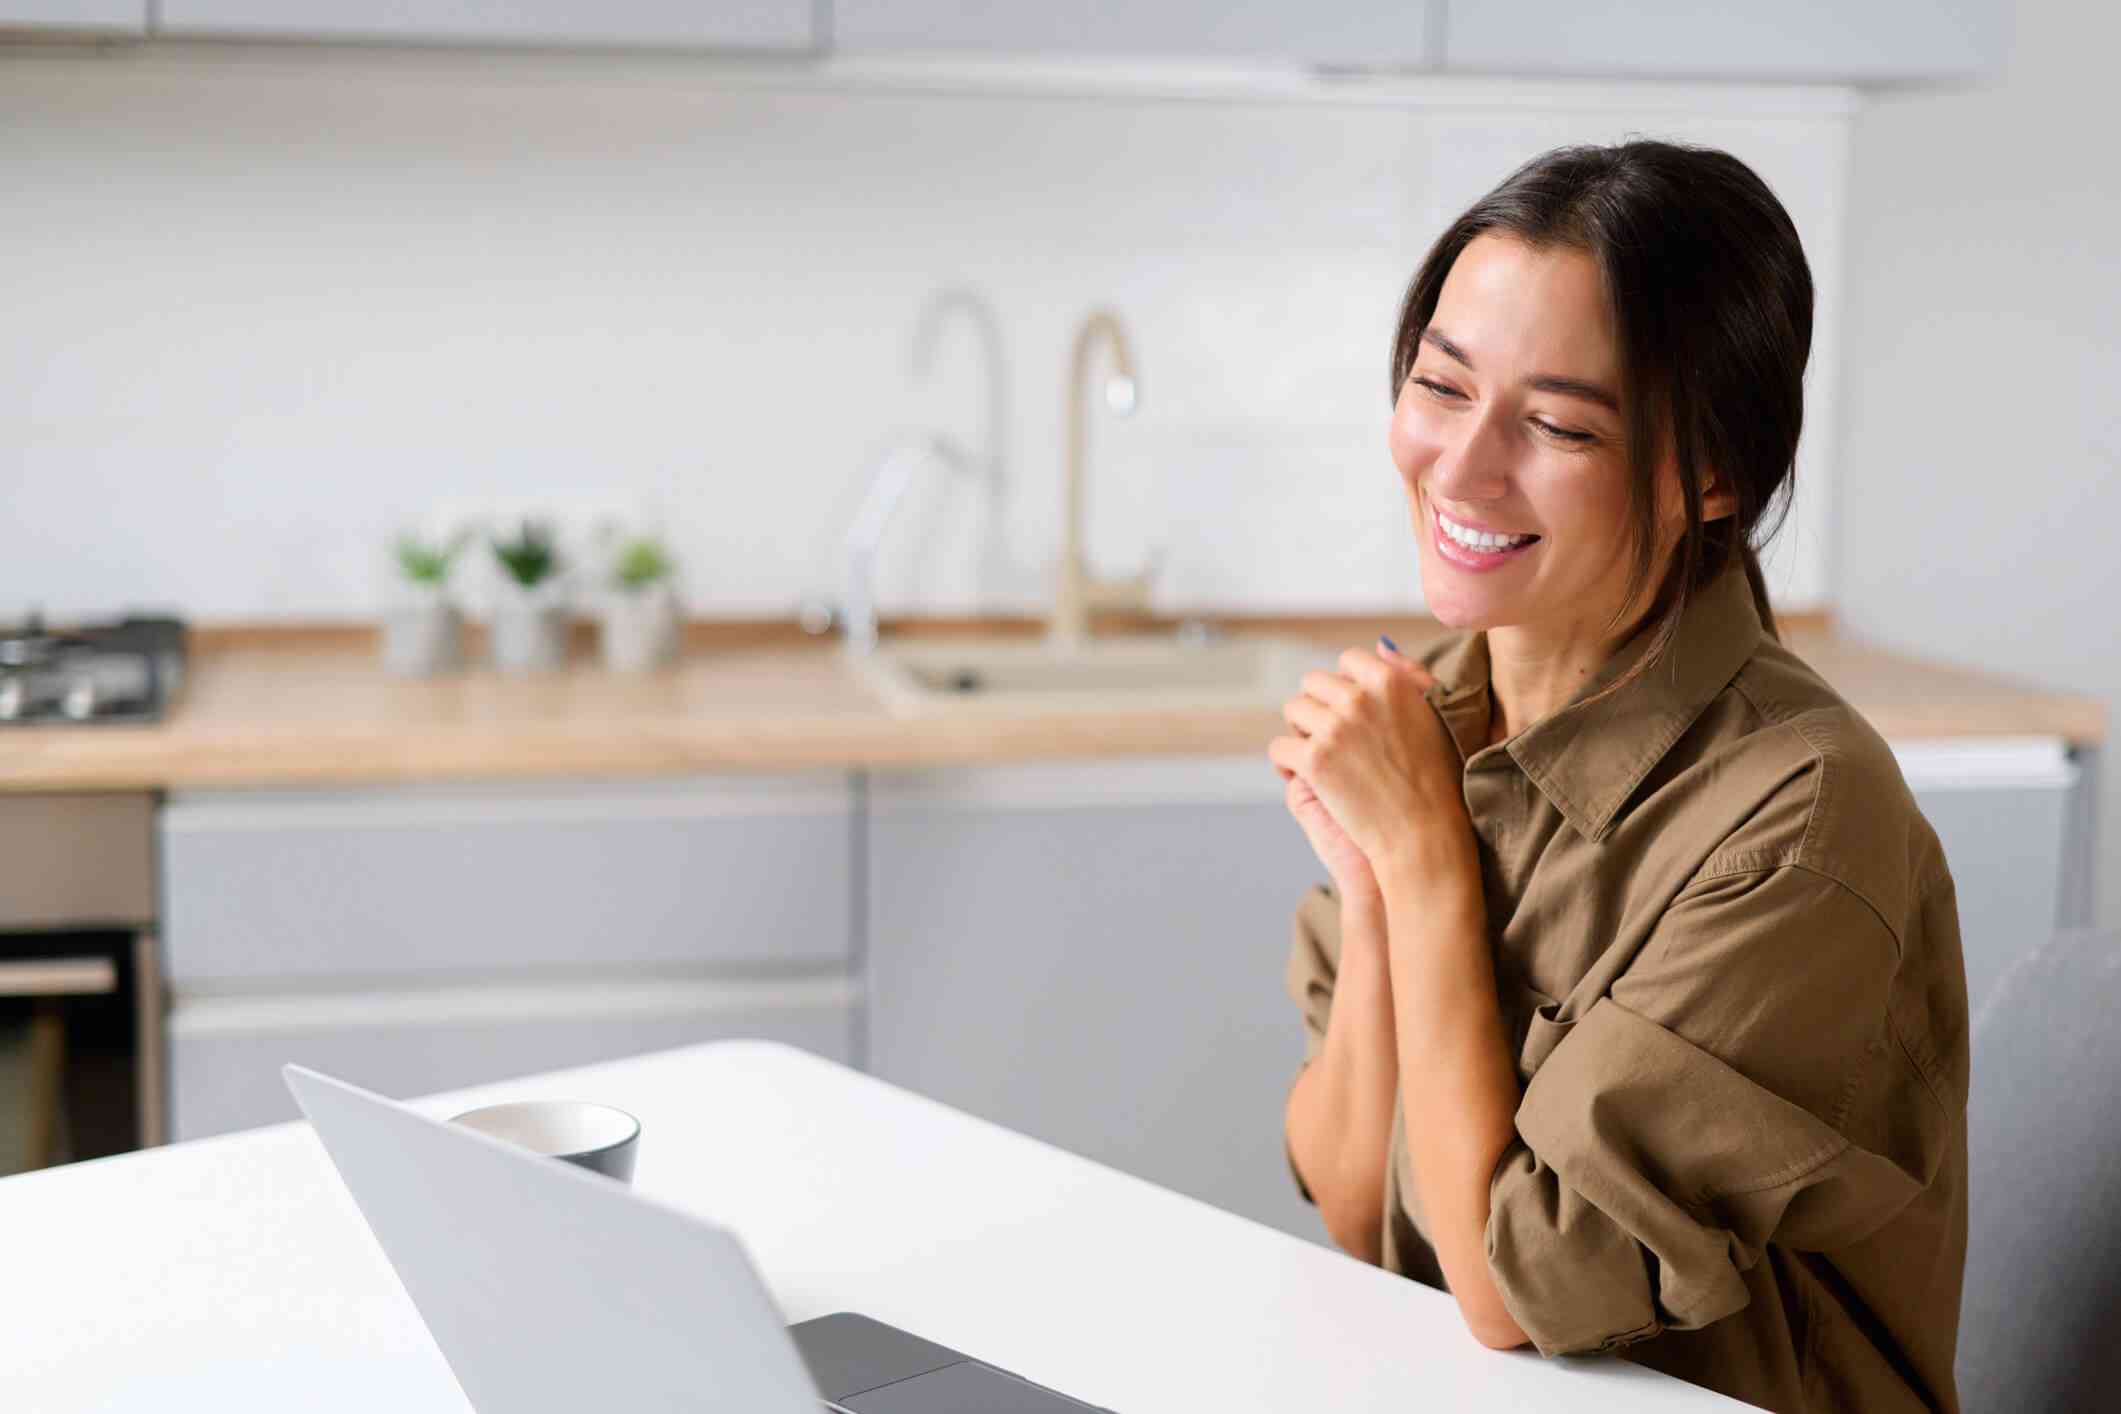 Woman in a brown button up shirt sits at her kitchen counter and smiles while she talks to a therapist on her computer